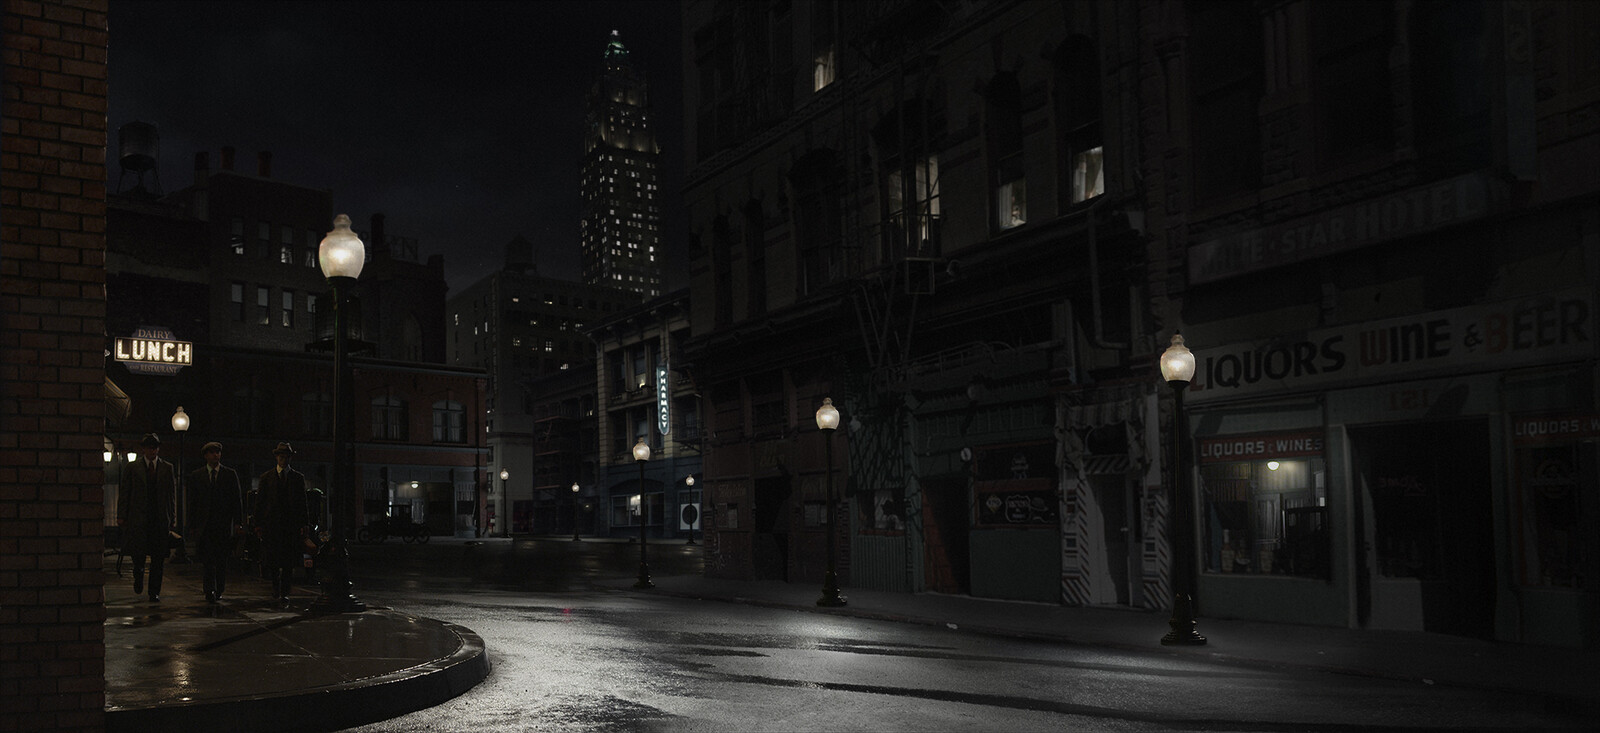 Post-production concept for night-time city street